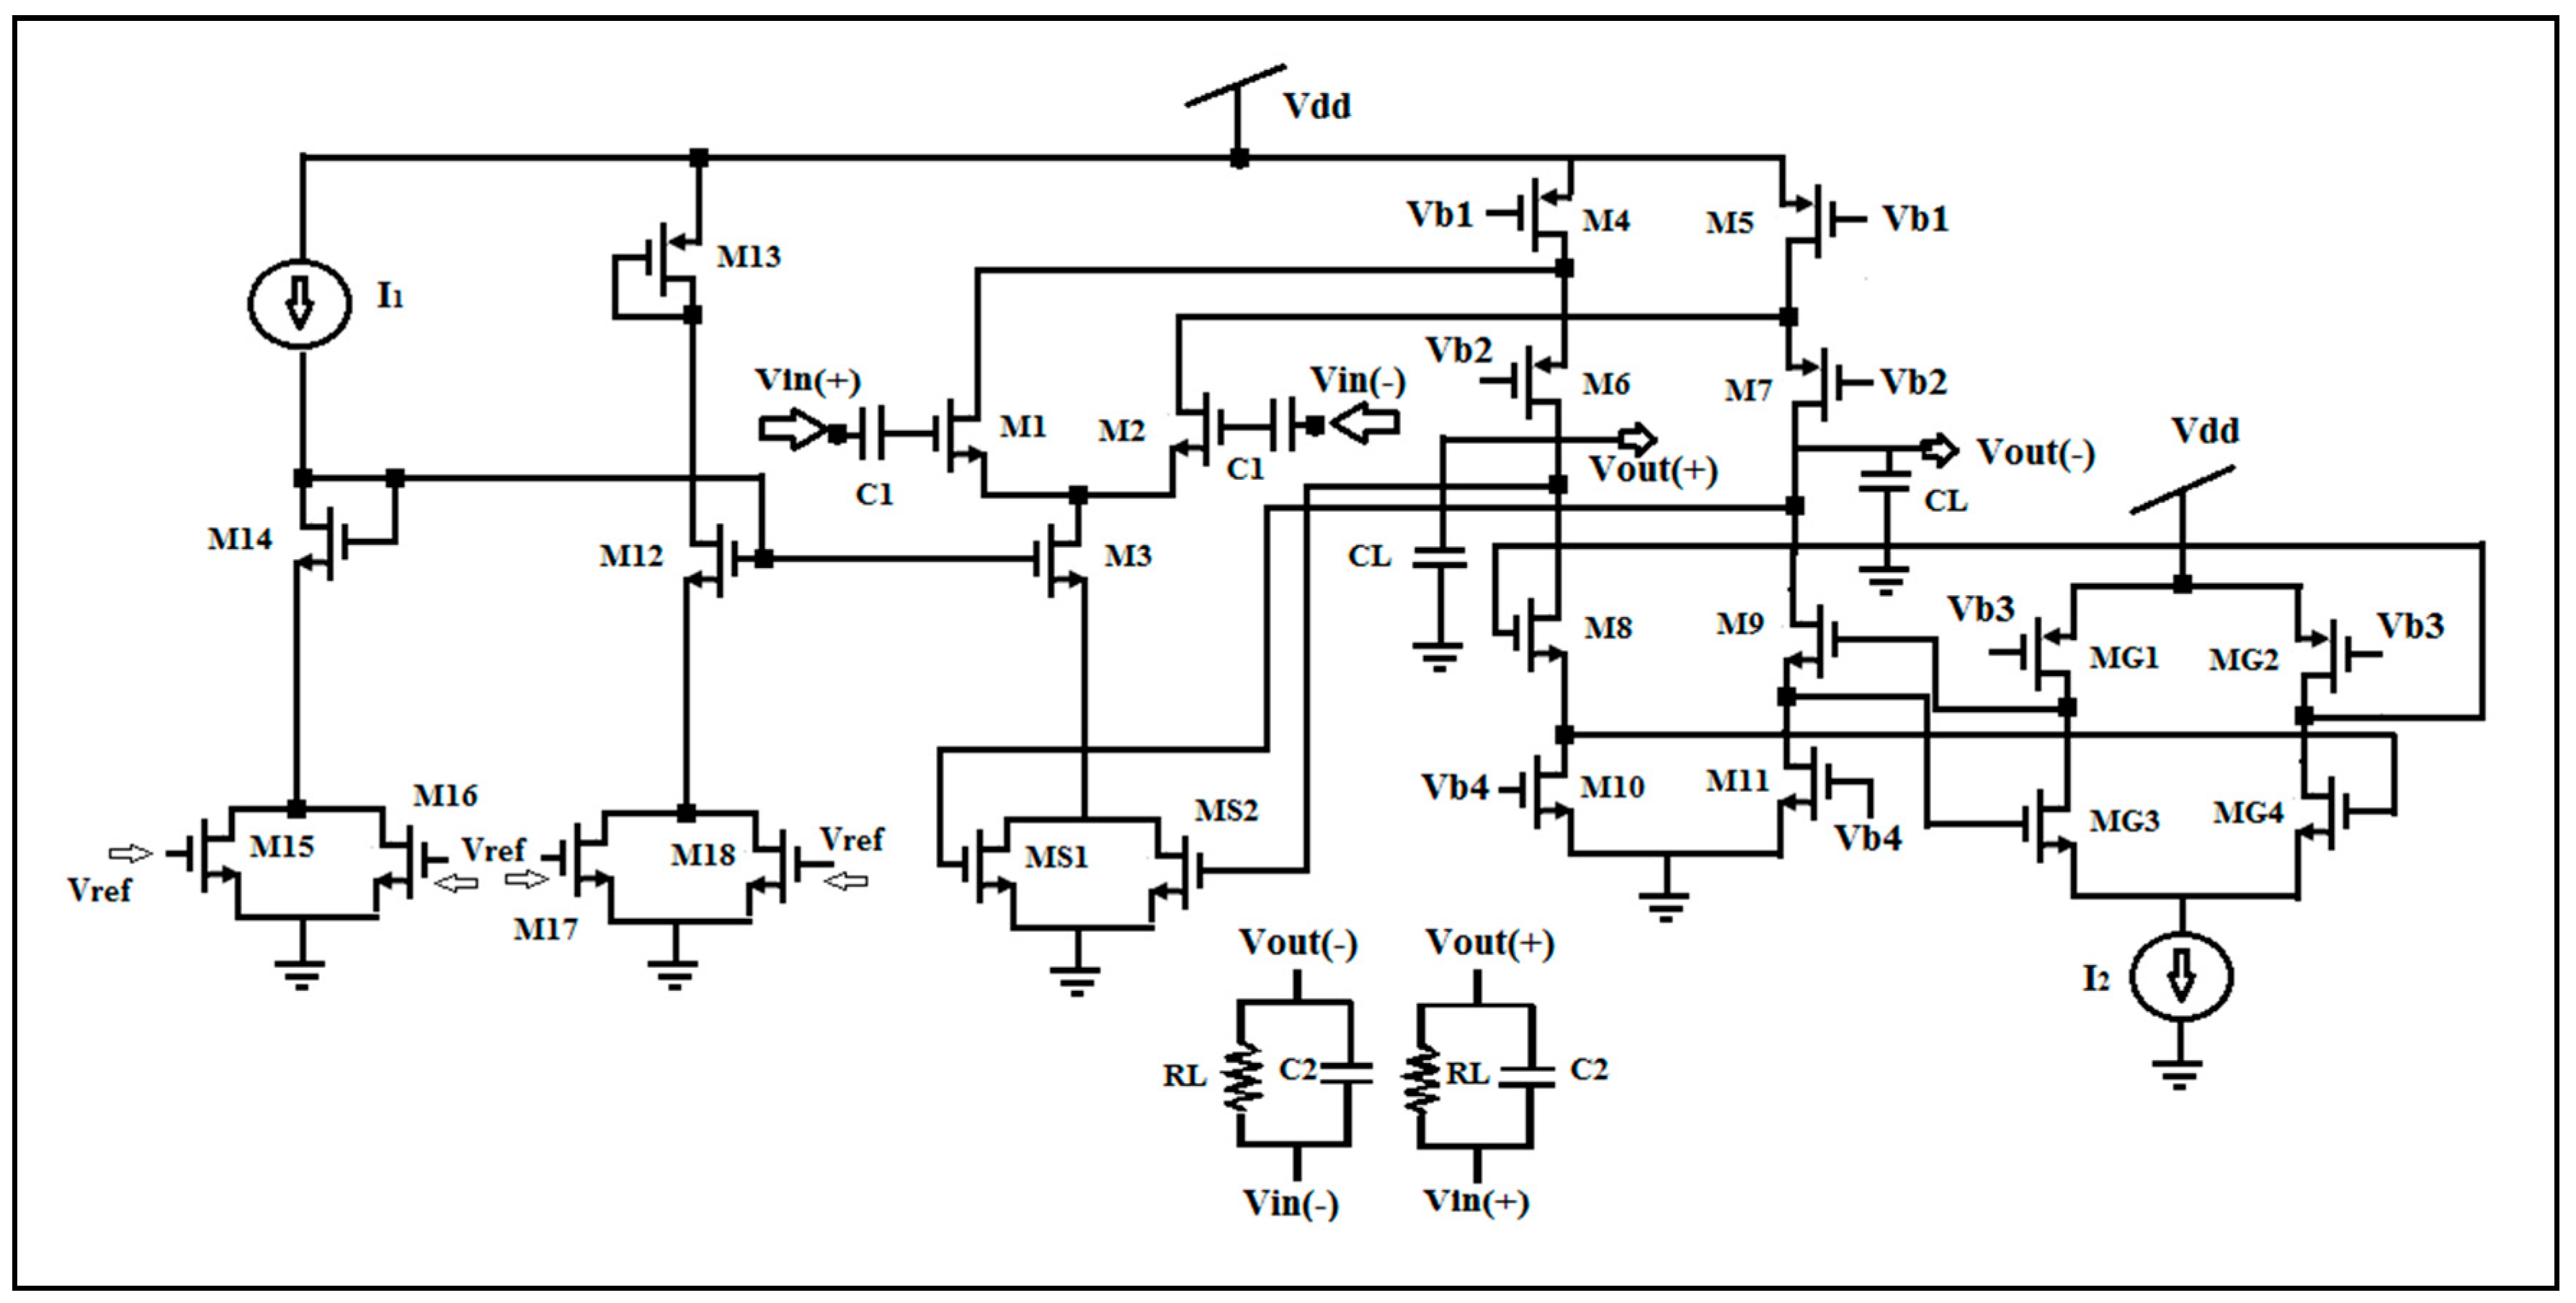 JLPEA | Free Full-Text | An Improved CMOS Design of Op-Amp Comparator ...